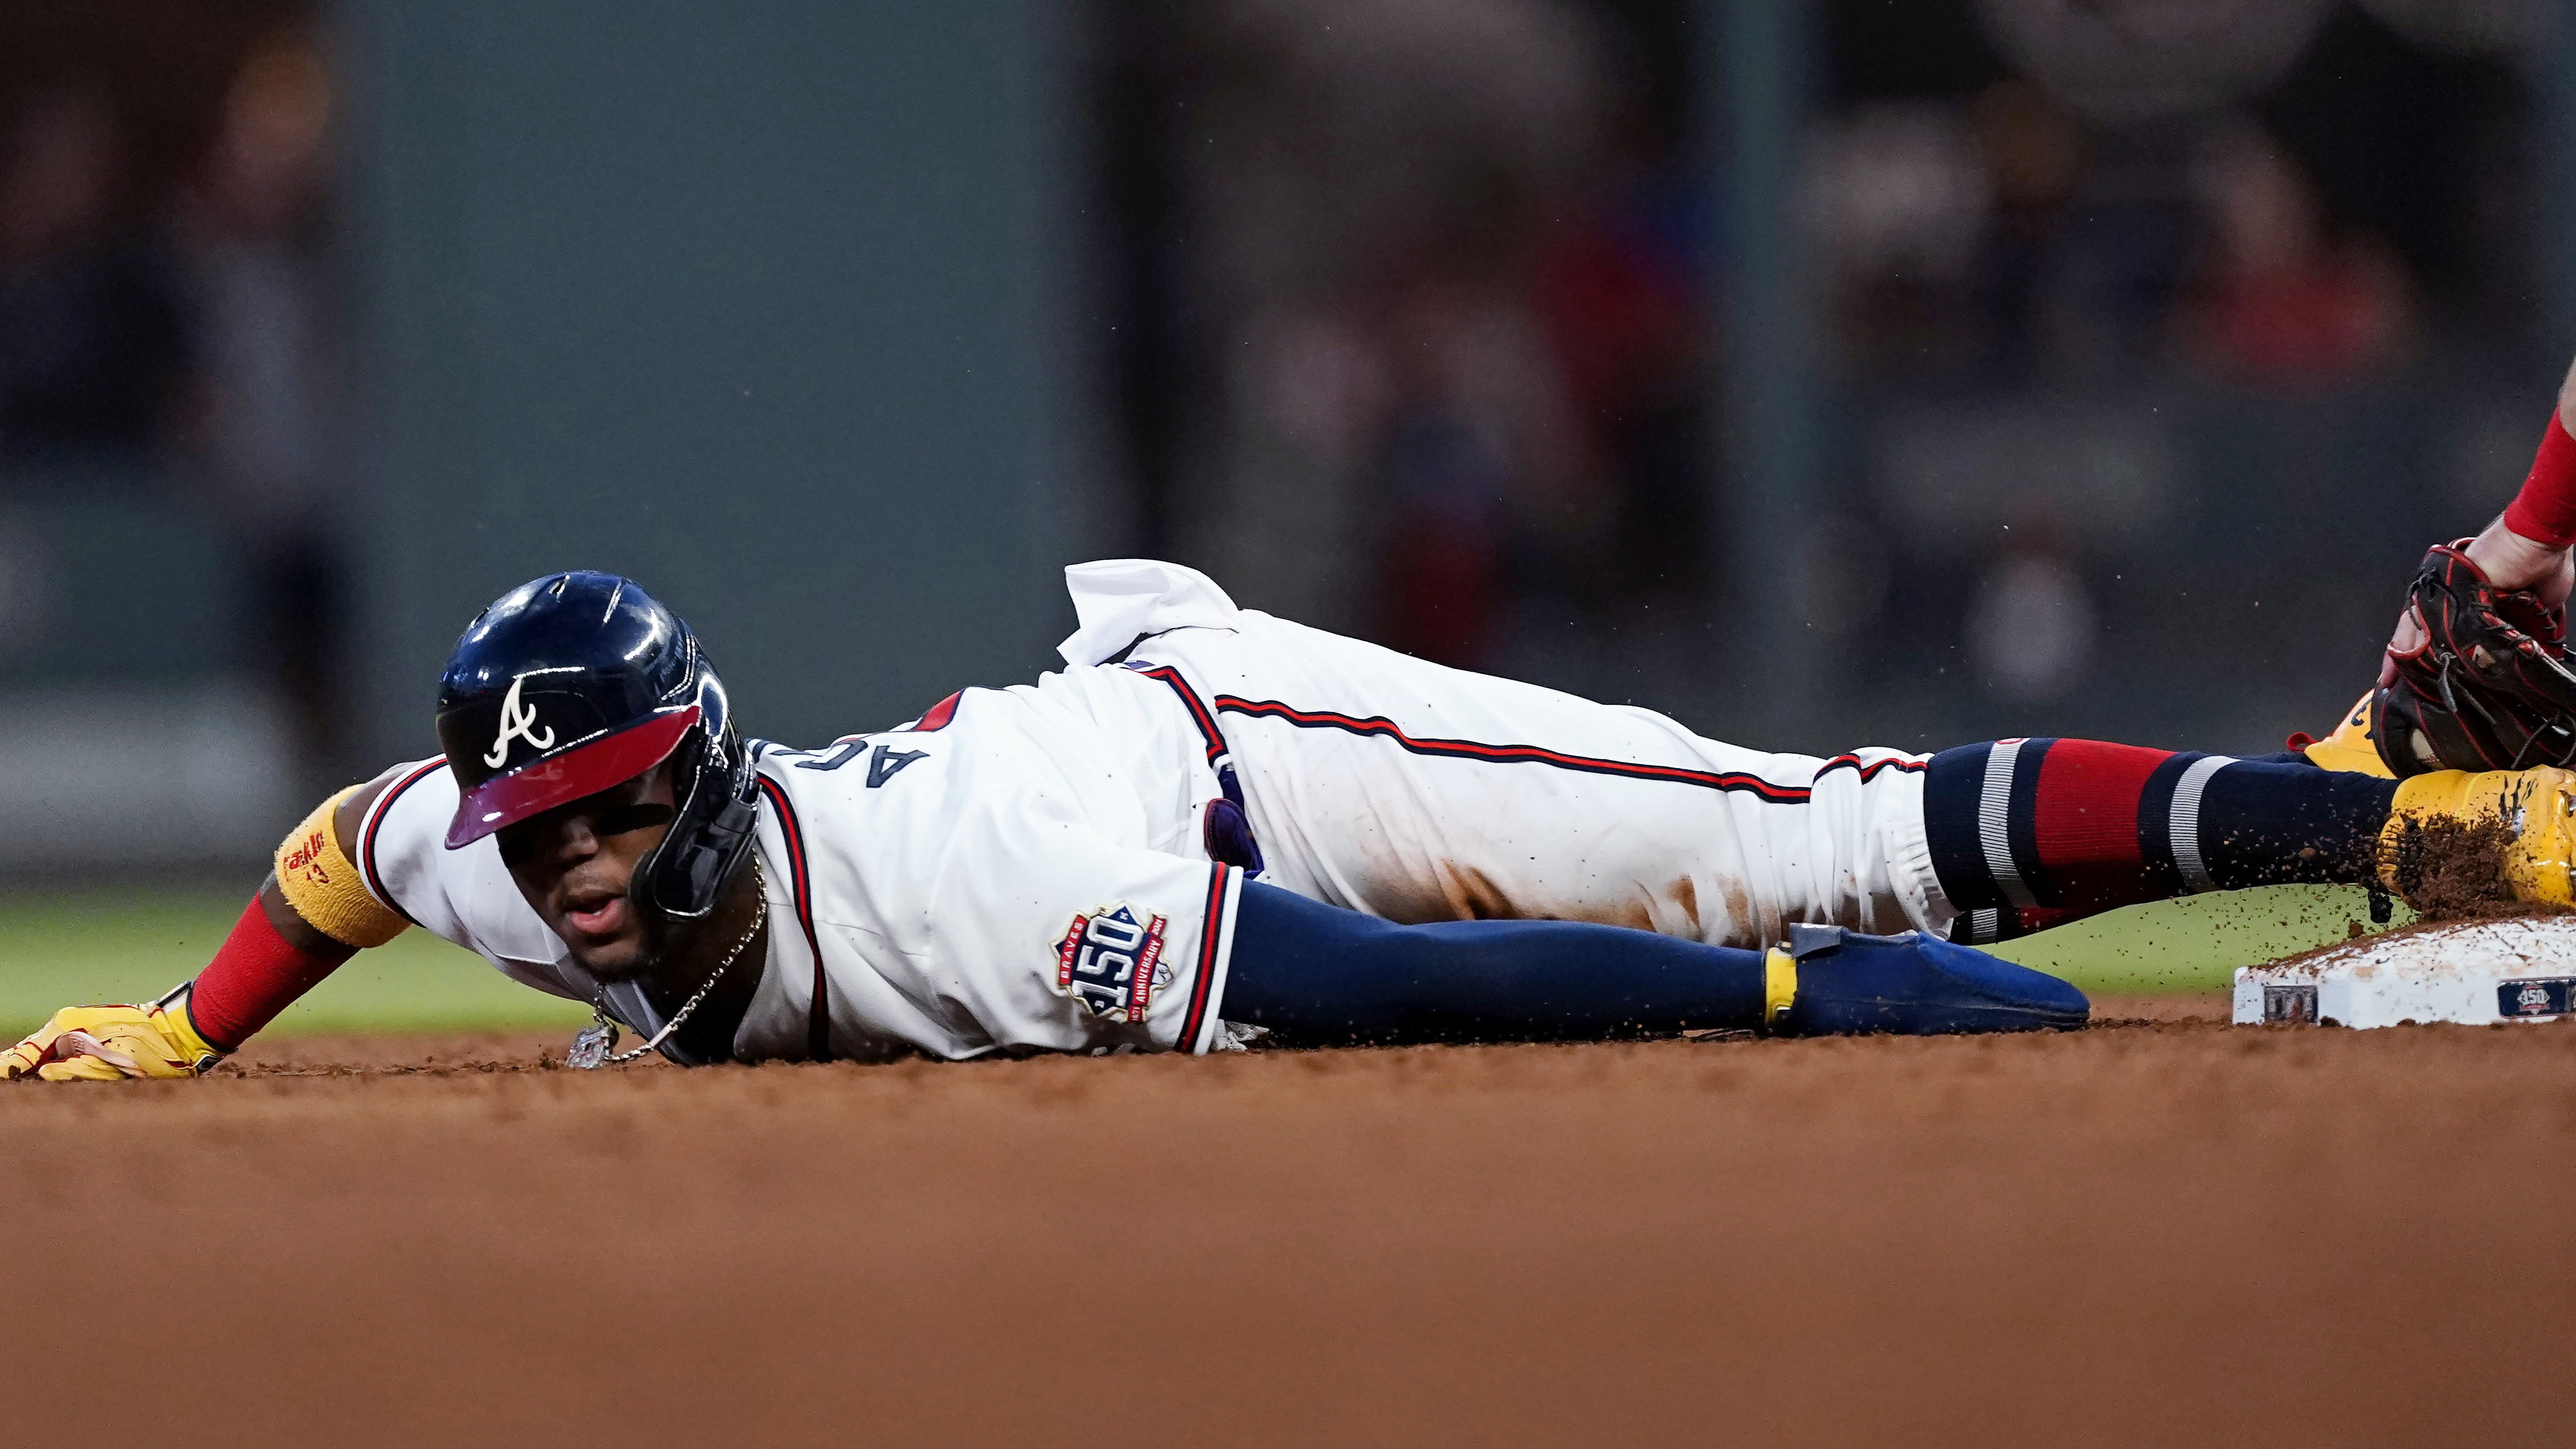 Braves' Ronald Acuña Jr. hit on the left elbow by a pitch, leaves game;  X-rays negative - NBC Sports